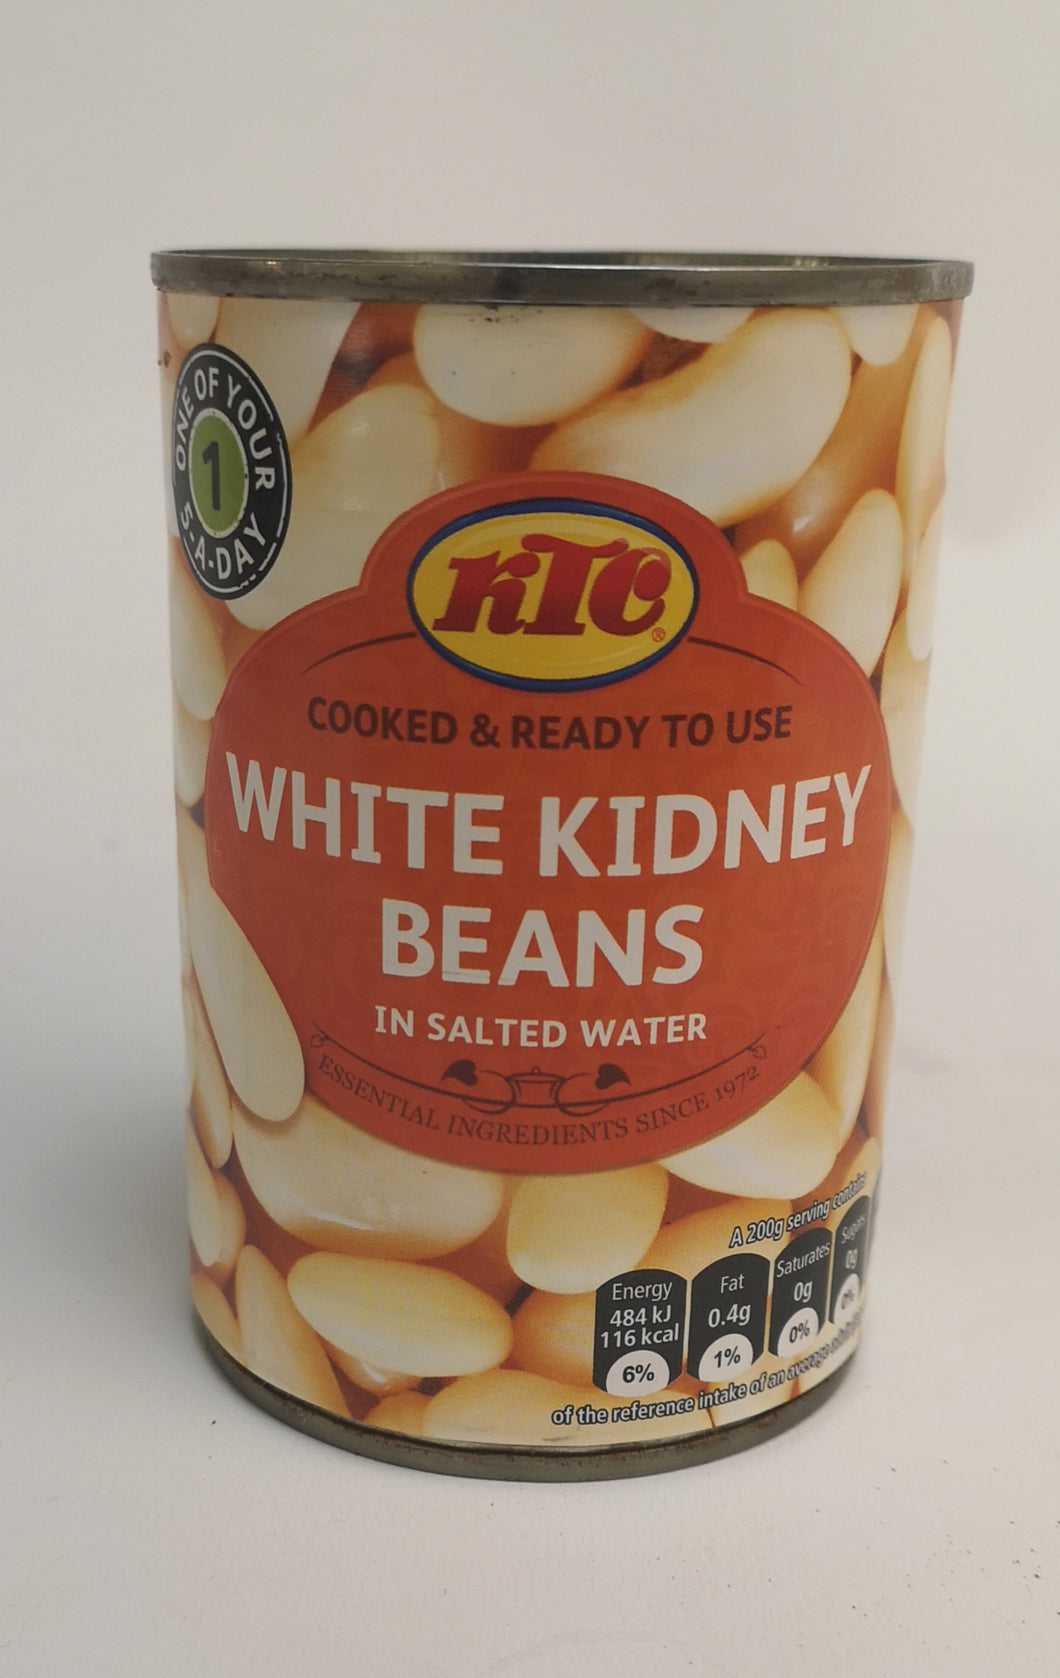 KTC White Kidney Beans in Salted Water